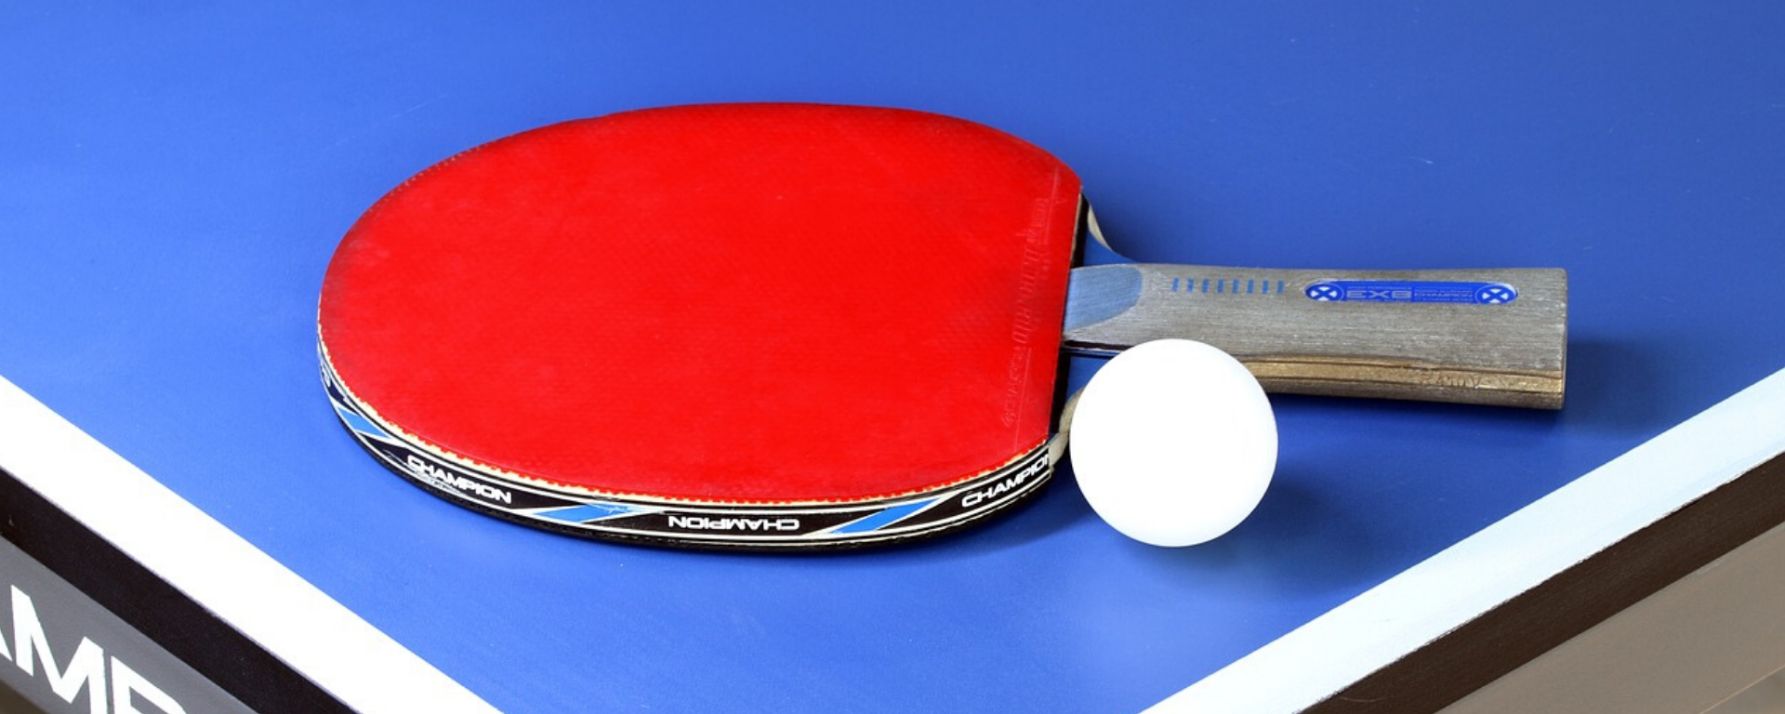 Ping Pong Table - Maintain A Ping Pong Table